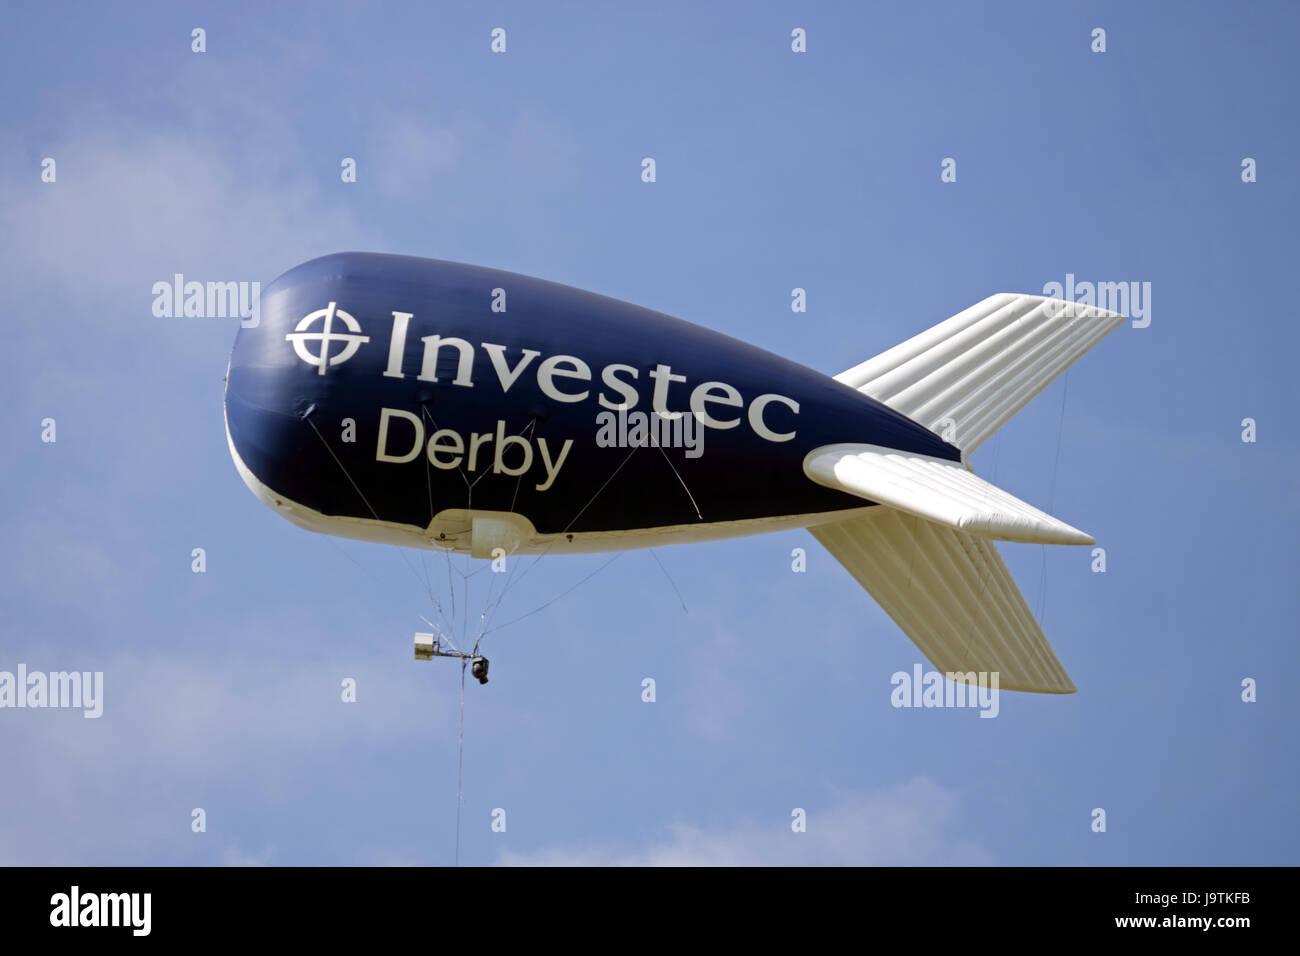 Epsom Downs, Surrey, UK. 3rd June 2017. The Investec blimp tethered over the racecourse on Derby Day at Epsom Downs in Surrey. Stock Photo